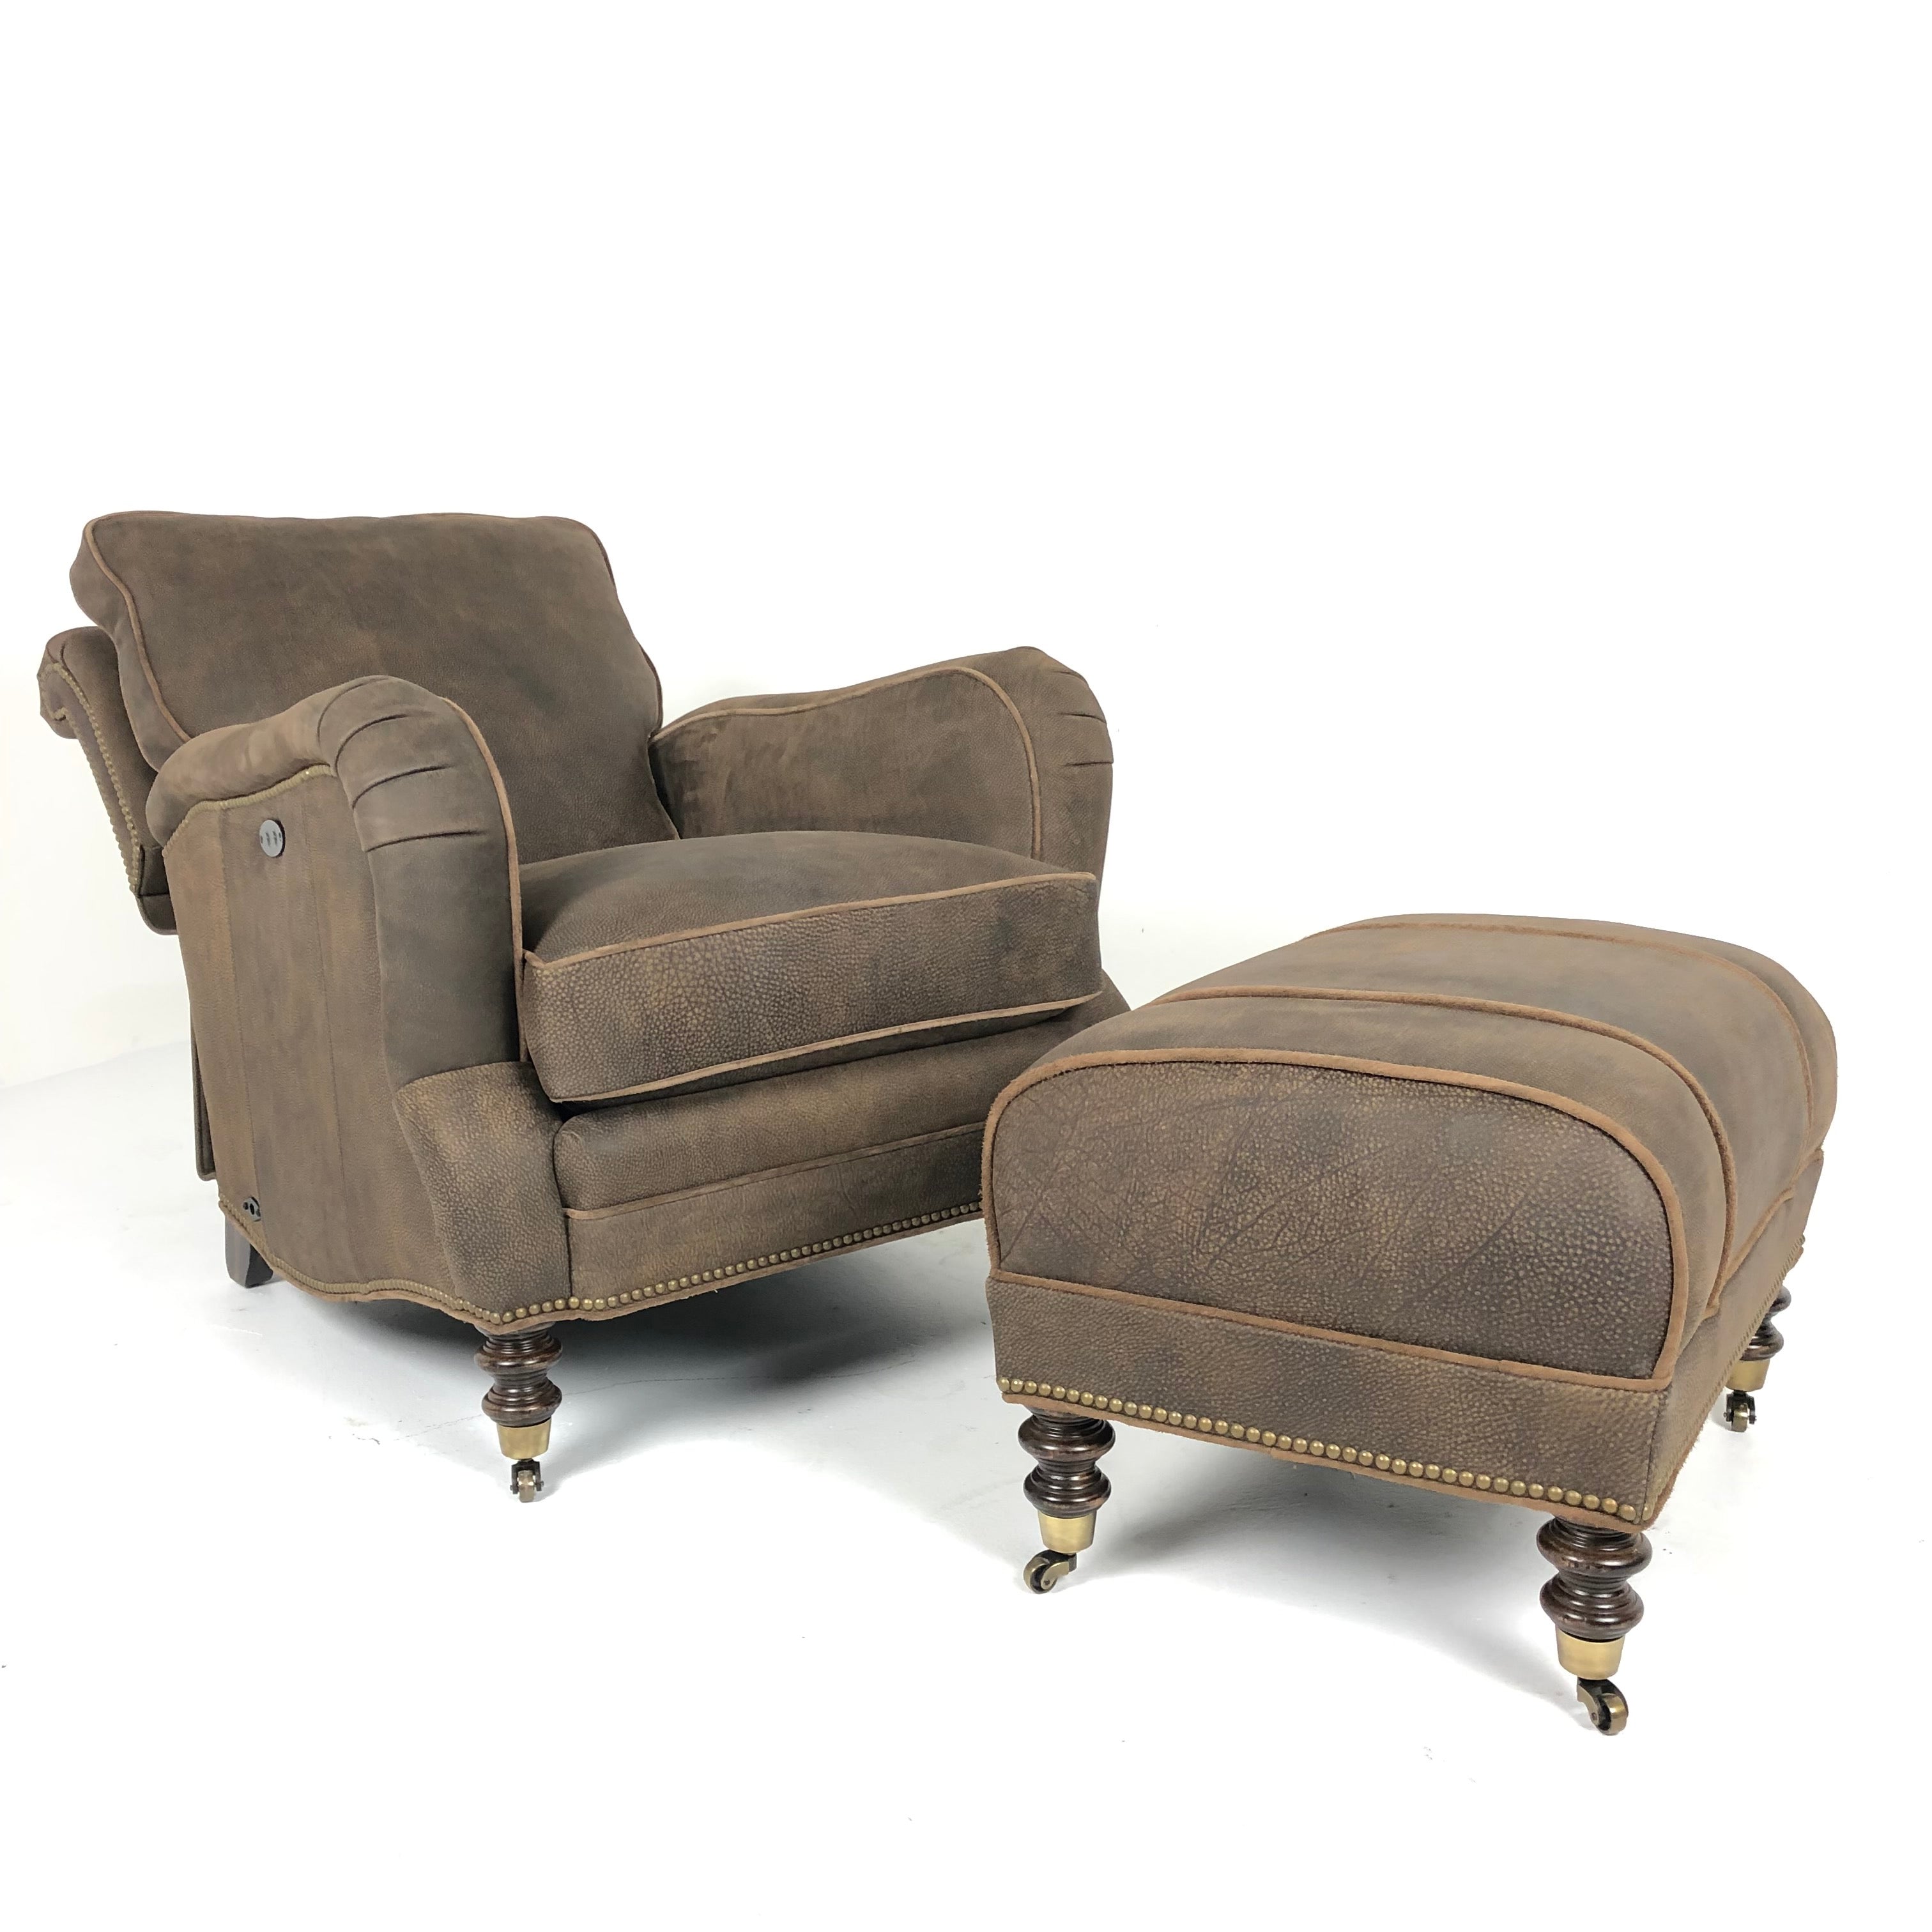 Cyrus Leather Tilt Back Chair & Ottoman by Wesley Hall shown in Zulu Chocolate leather - front/side reclined